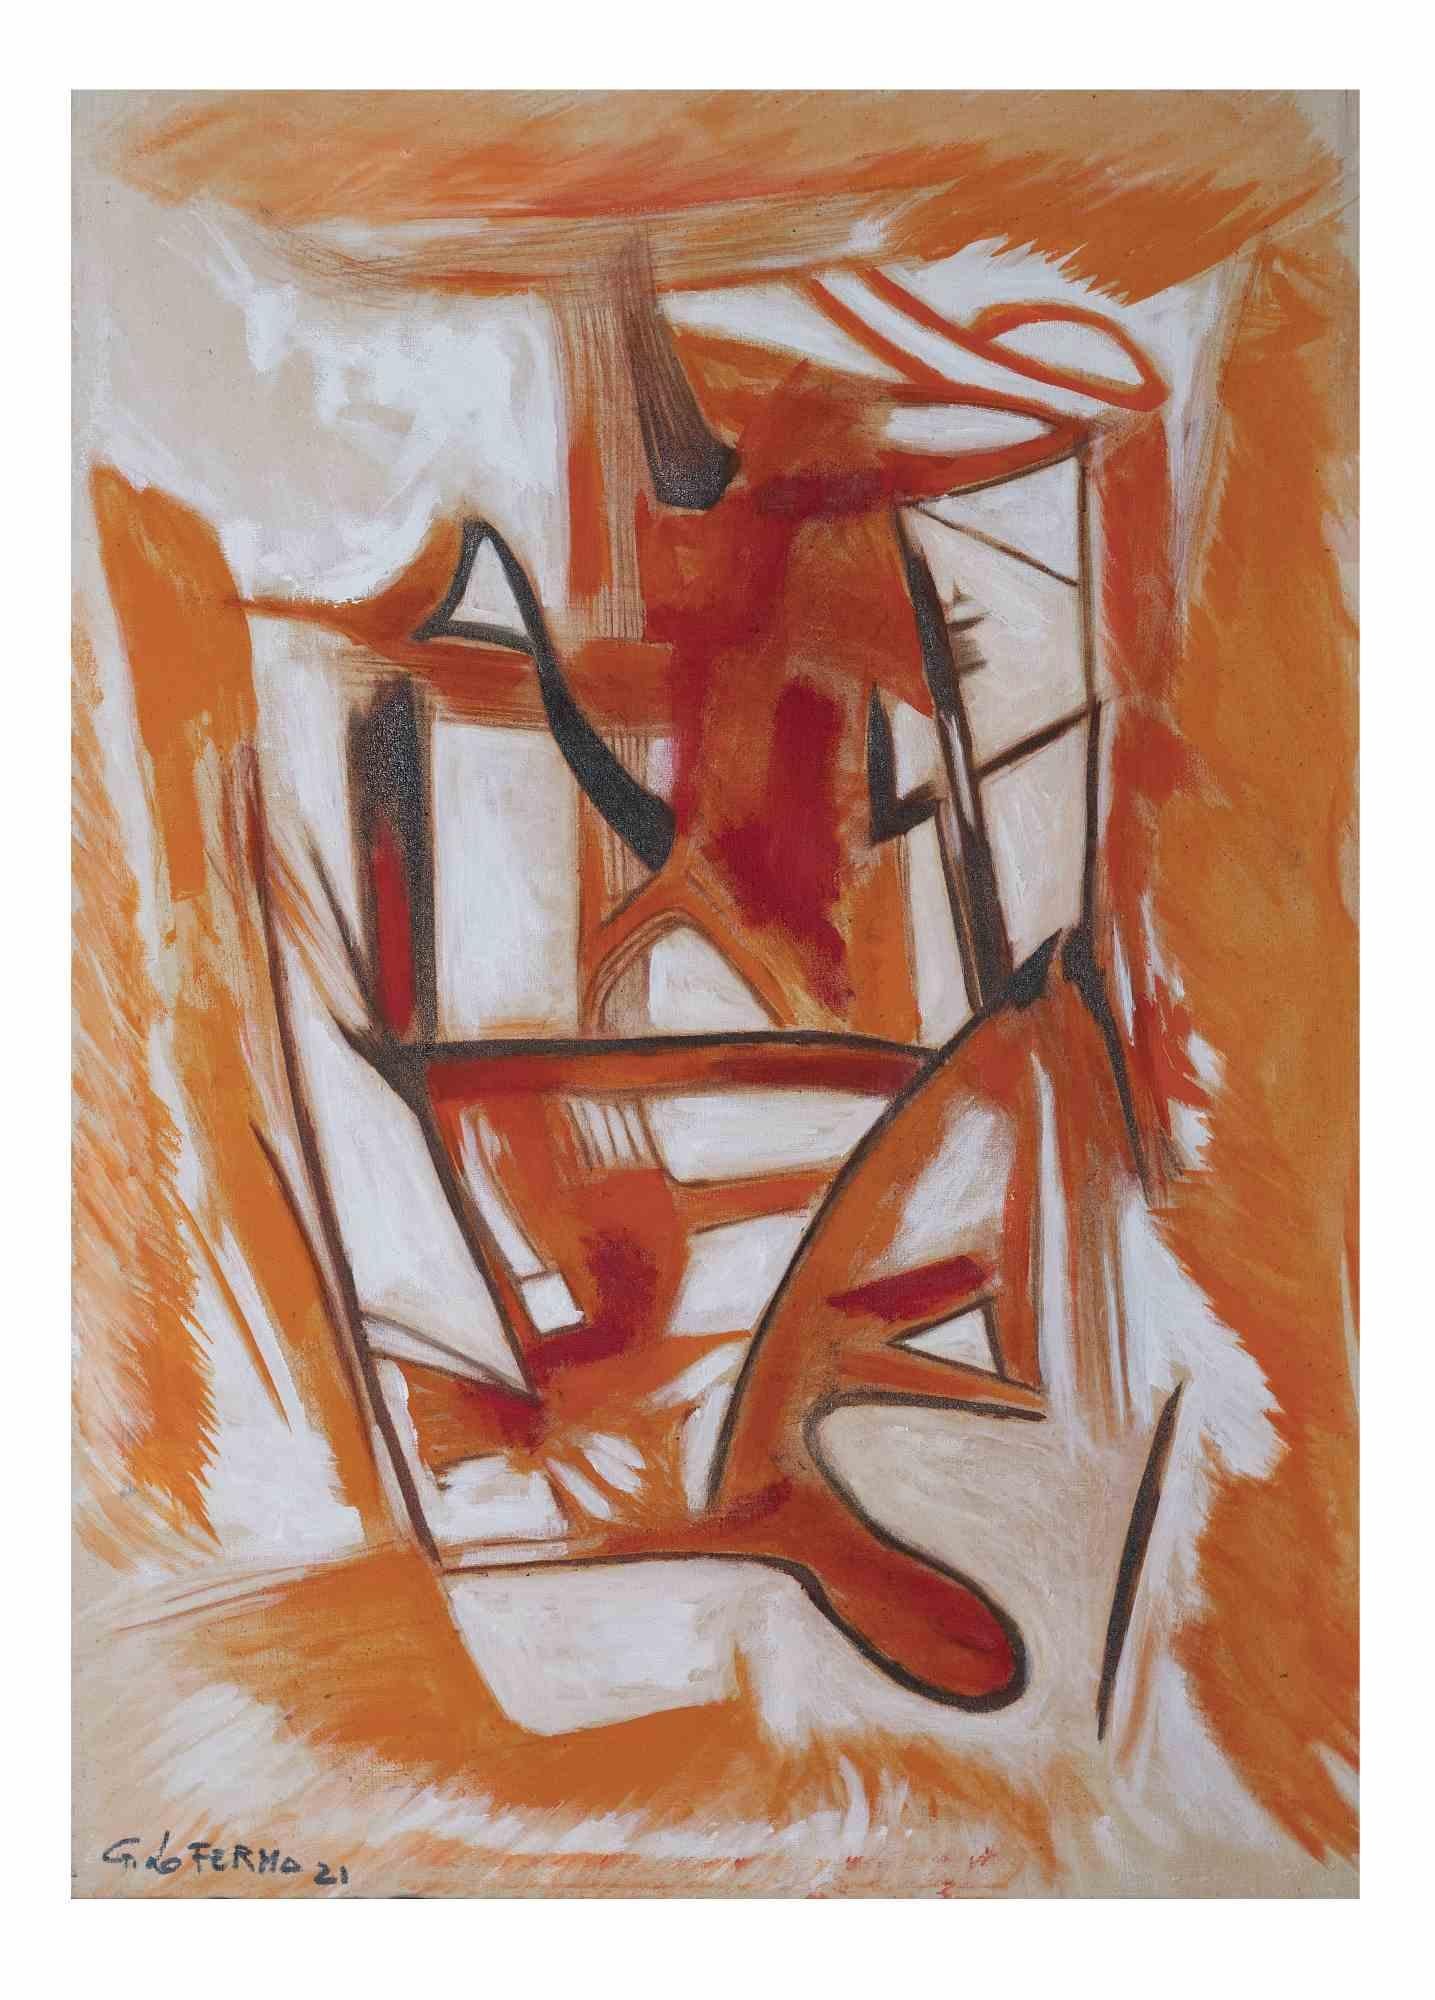 Orange Abstract Composition is an original artwork realized by Giorgio Lo Fermo (b. 1947) in 2021.

Original Oil Painting on Canvas.

Hand-signed, titled and dated on the back of the canvas.

Hand-signed and dated on the lower left margin: G. Lo